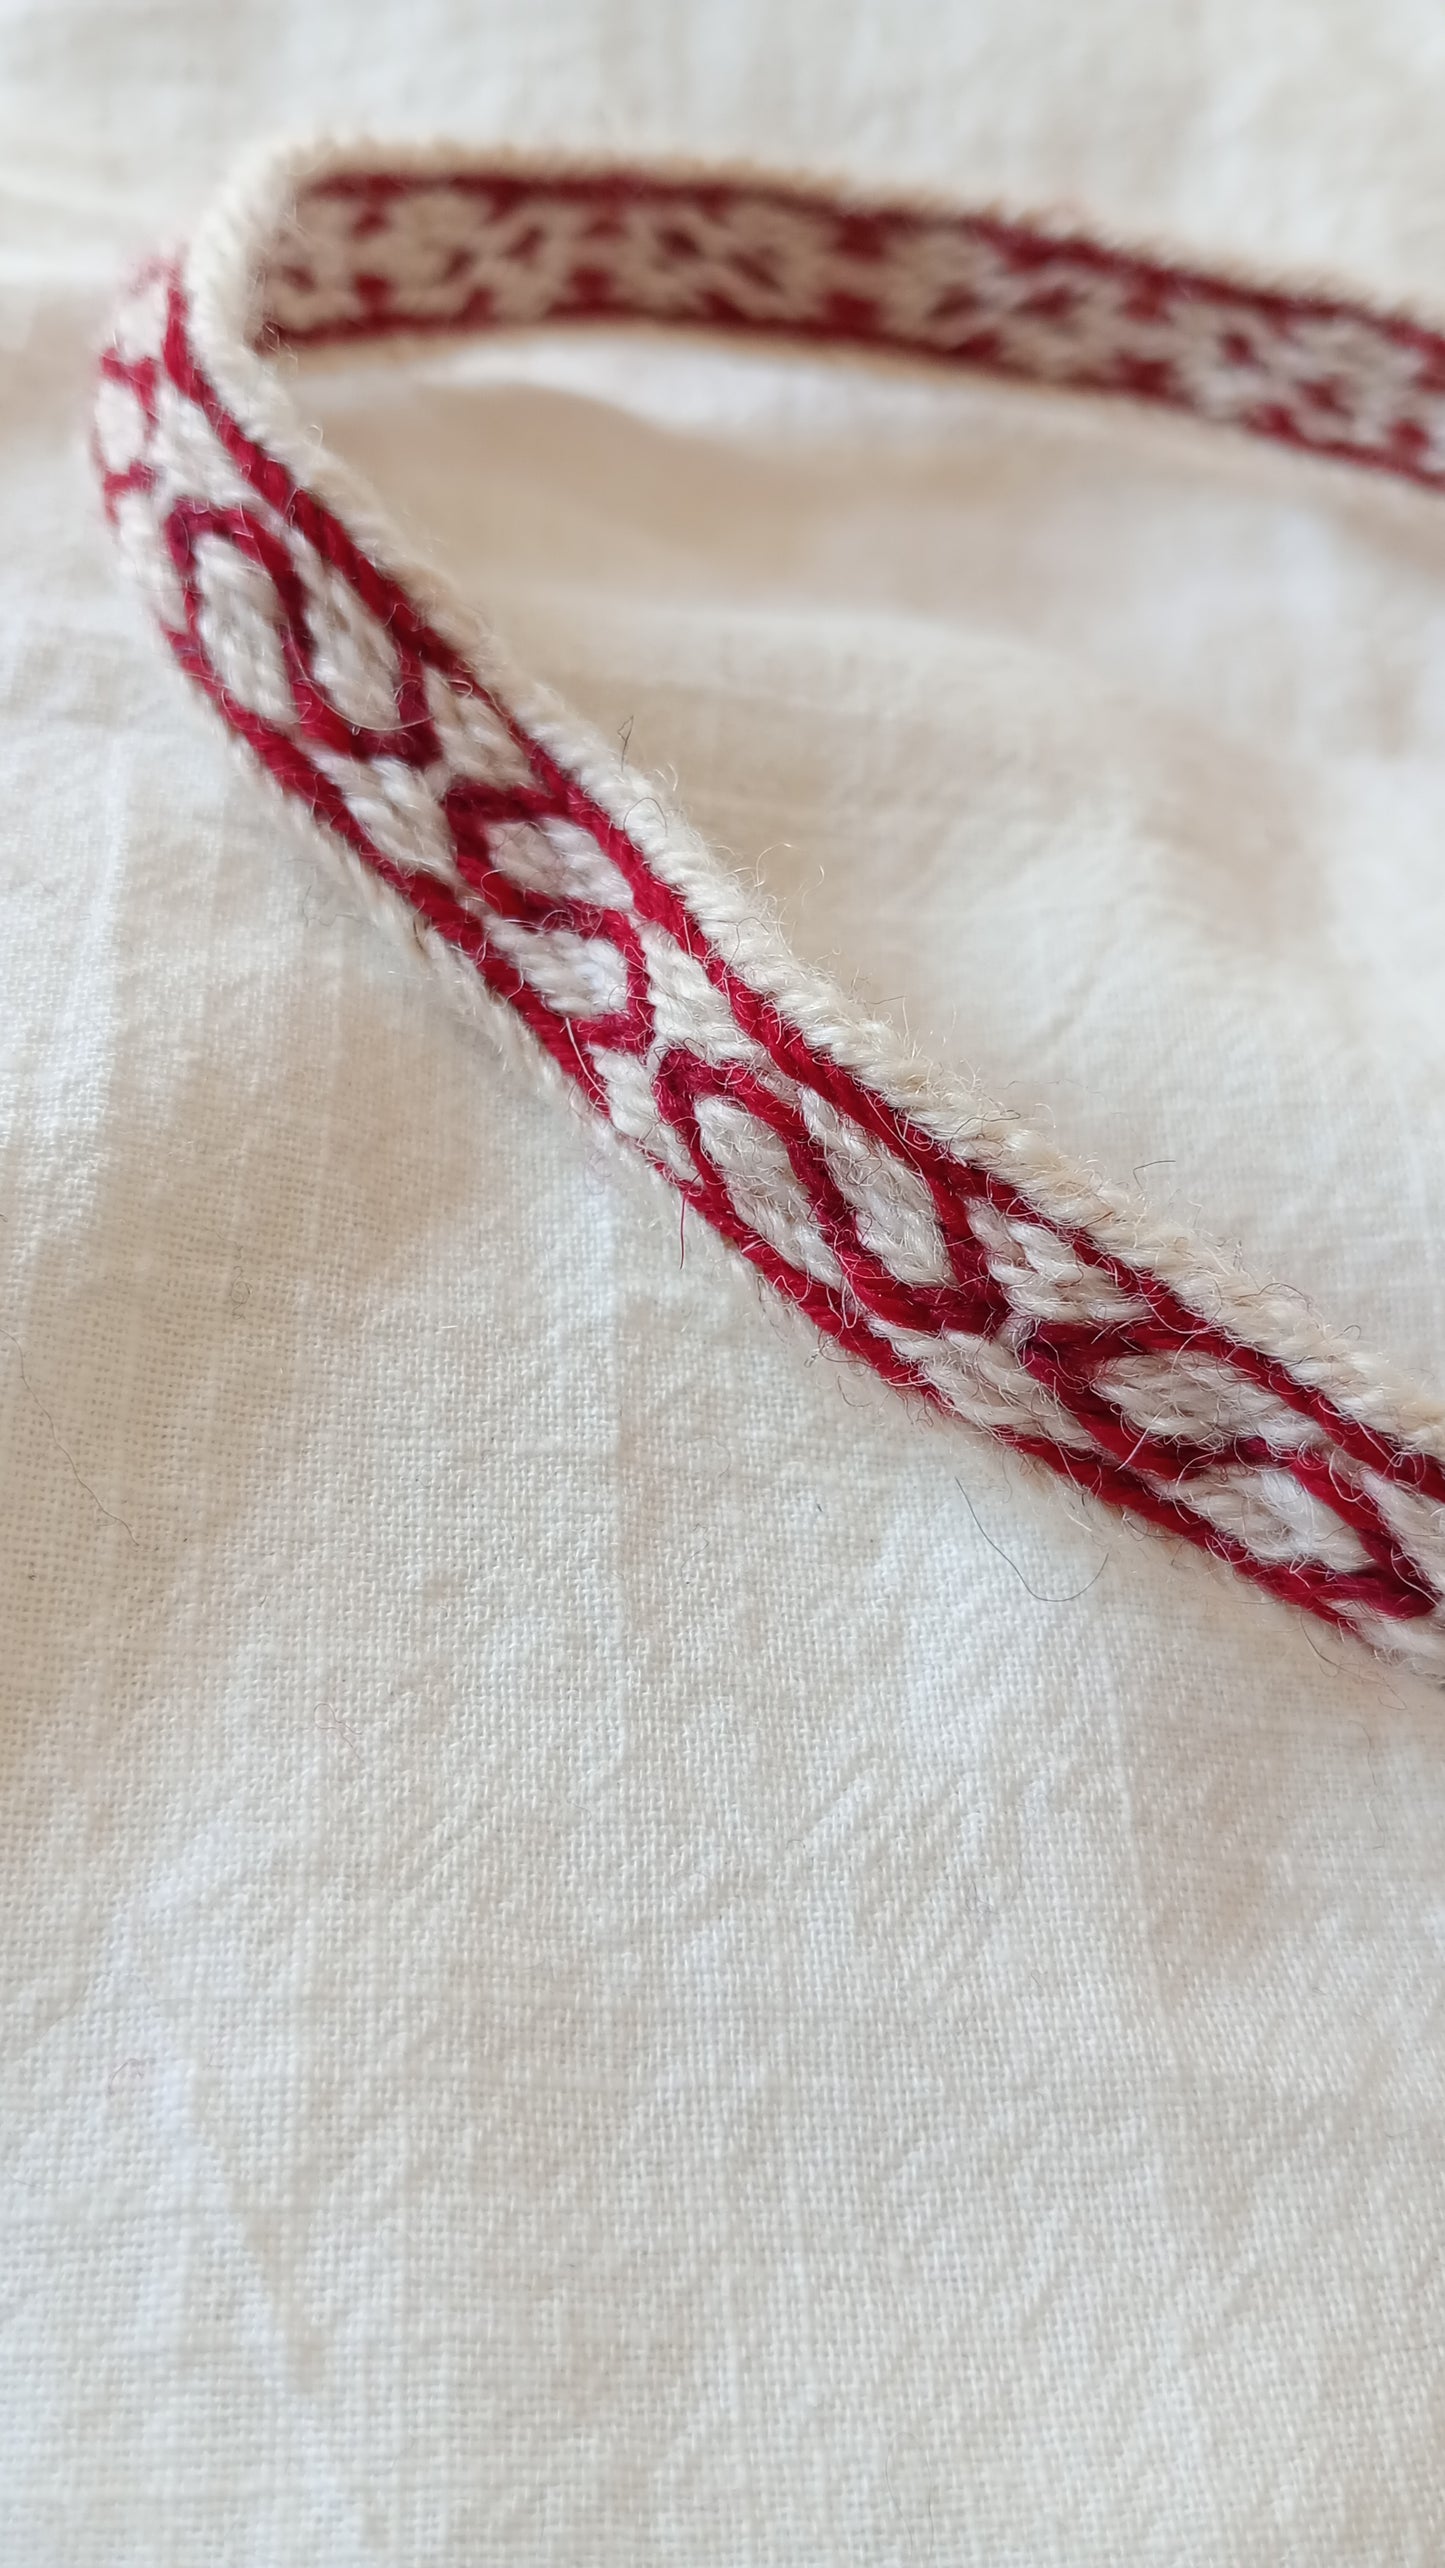 Fine adjustable headband in red and white